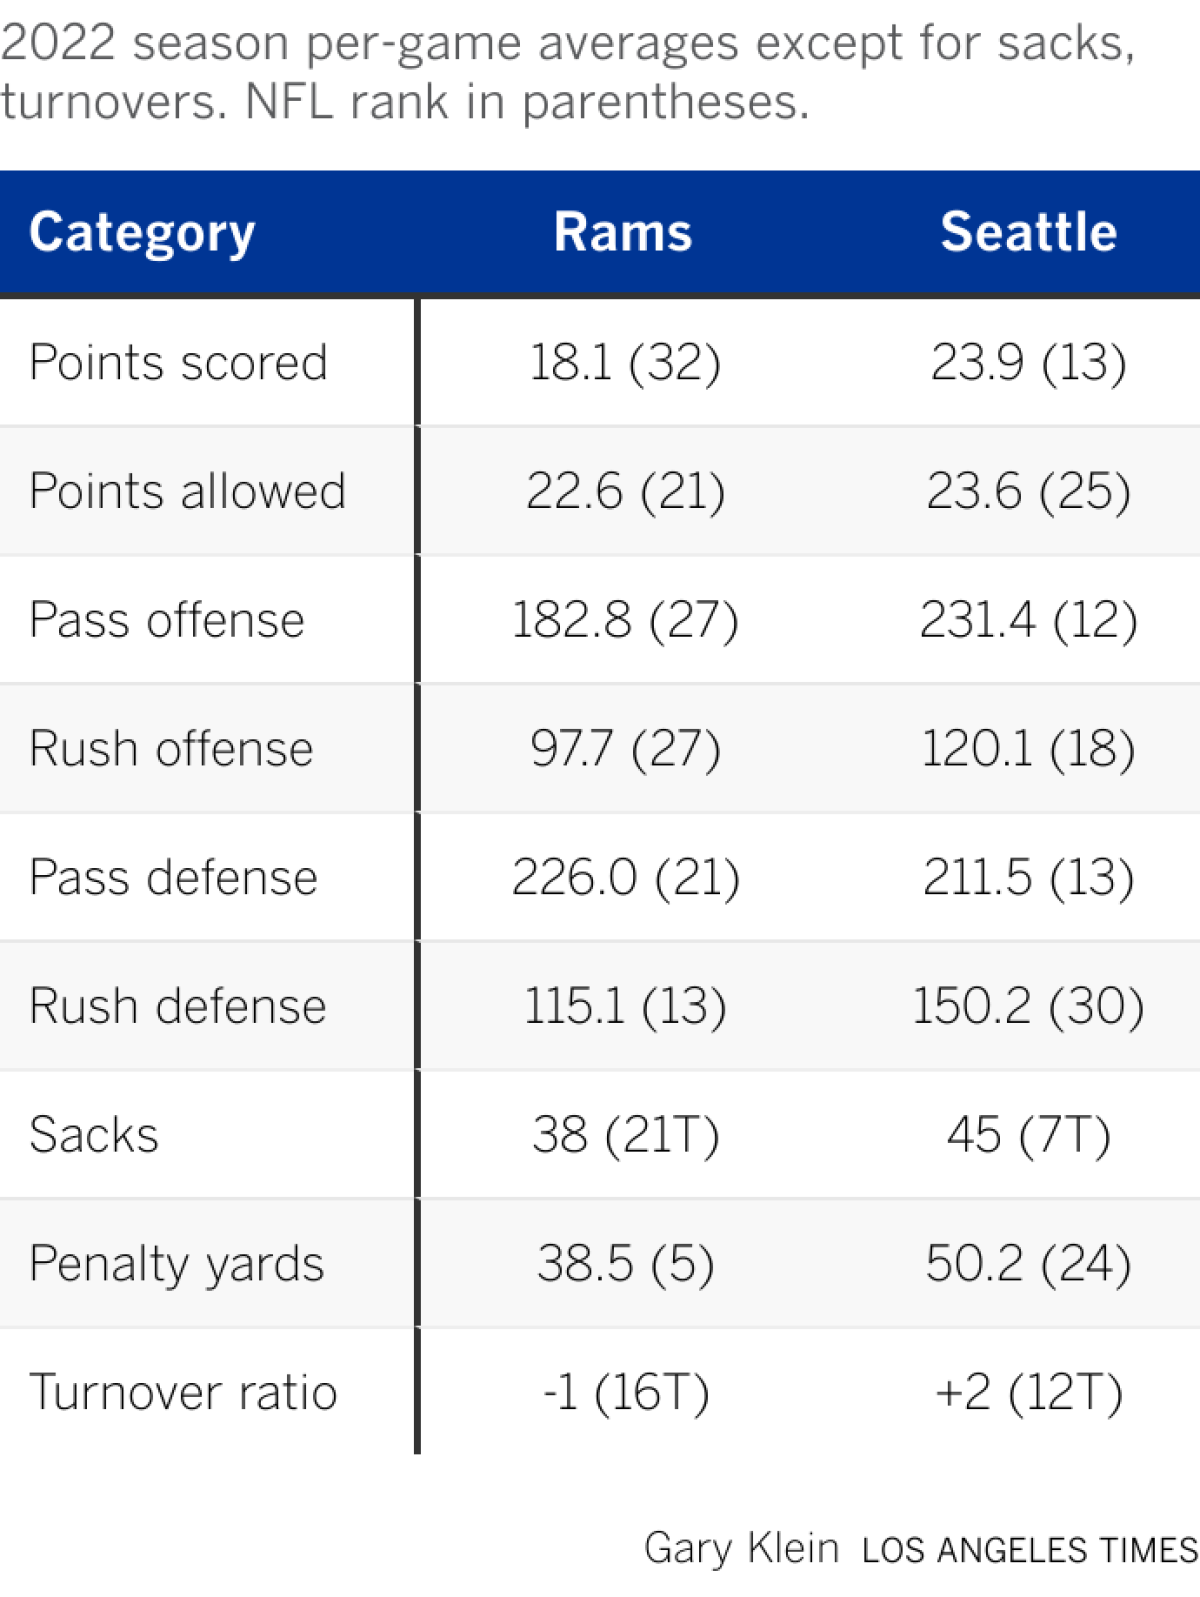 2022 season per-game averages except for sacks, turnovers. NFL rank in parentheses.